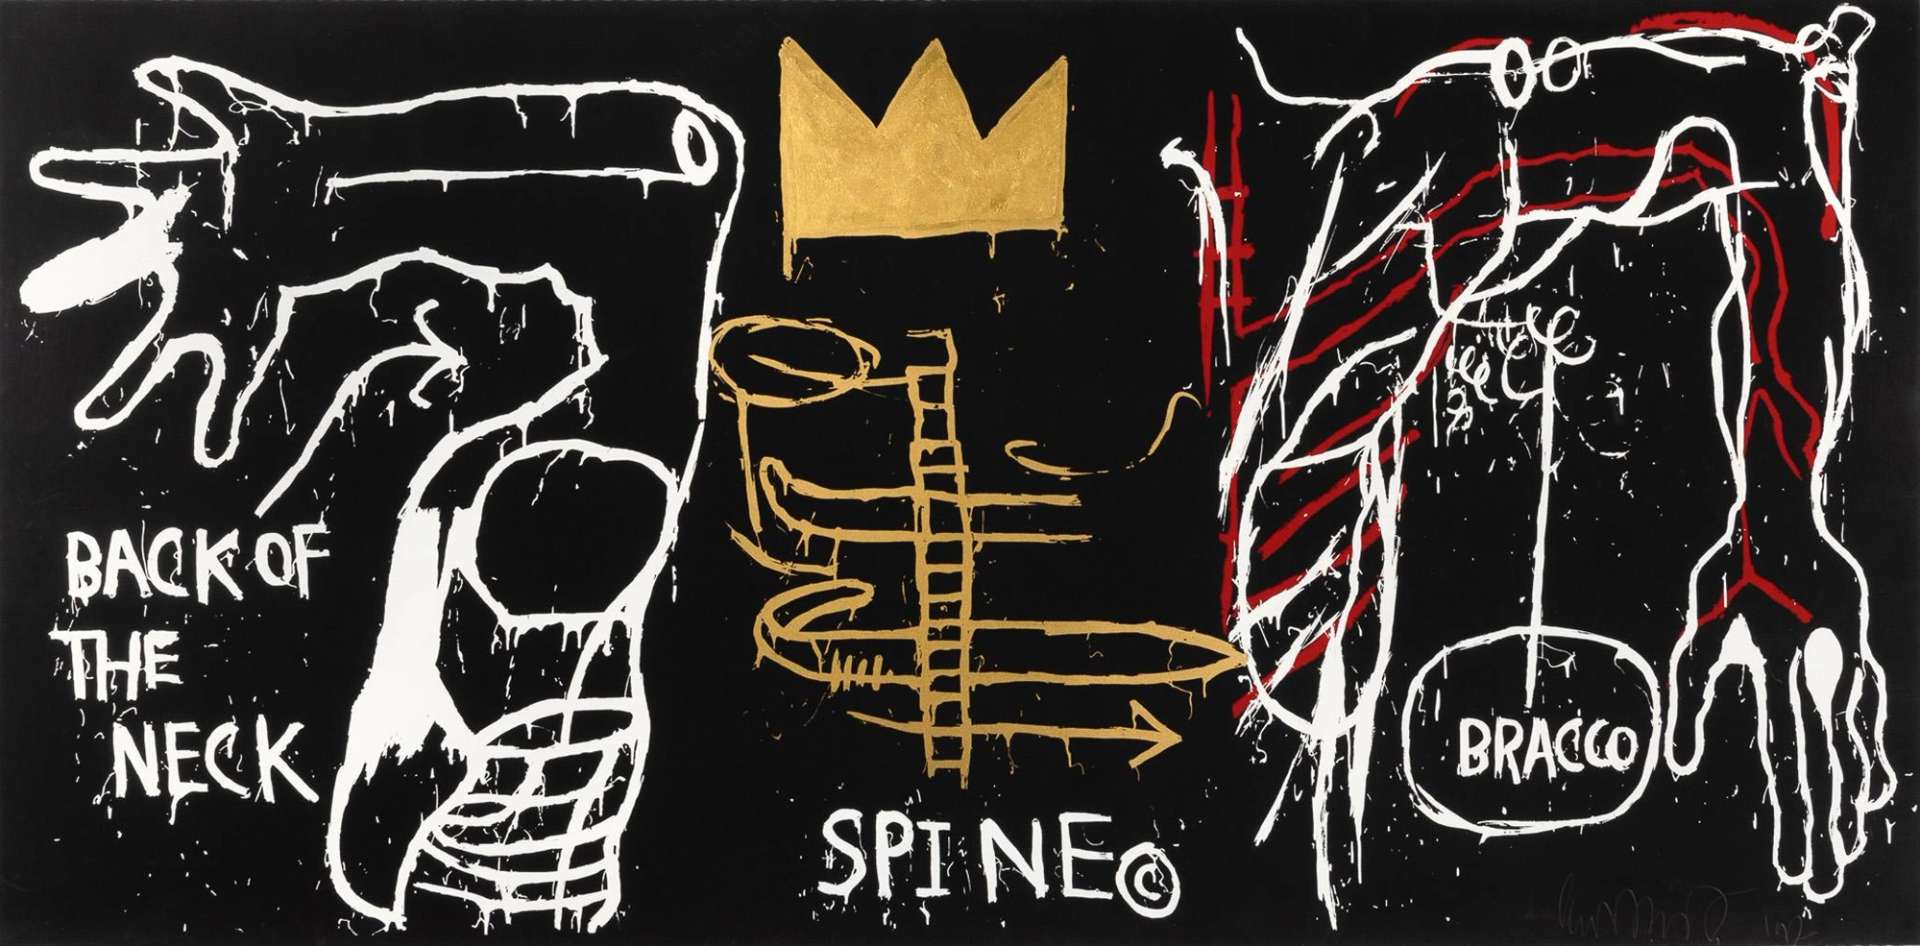 An image of the artwork Back Of The Neck by Basquiat. It shows several disconnected depictions of body parts, including arms and a spine. A crown motif is prominently positioned at the centre.